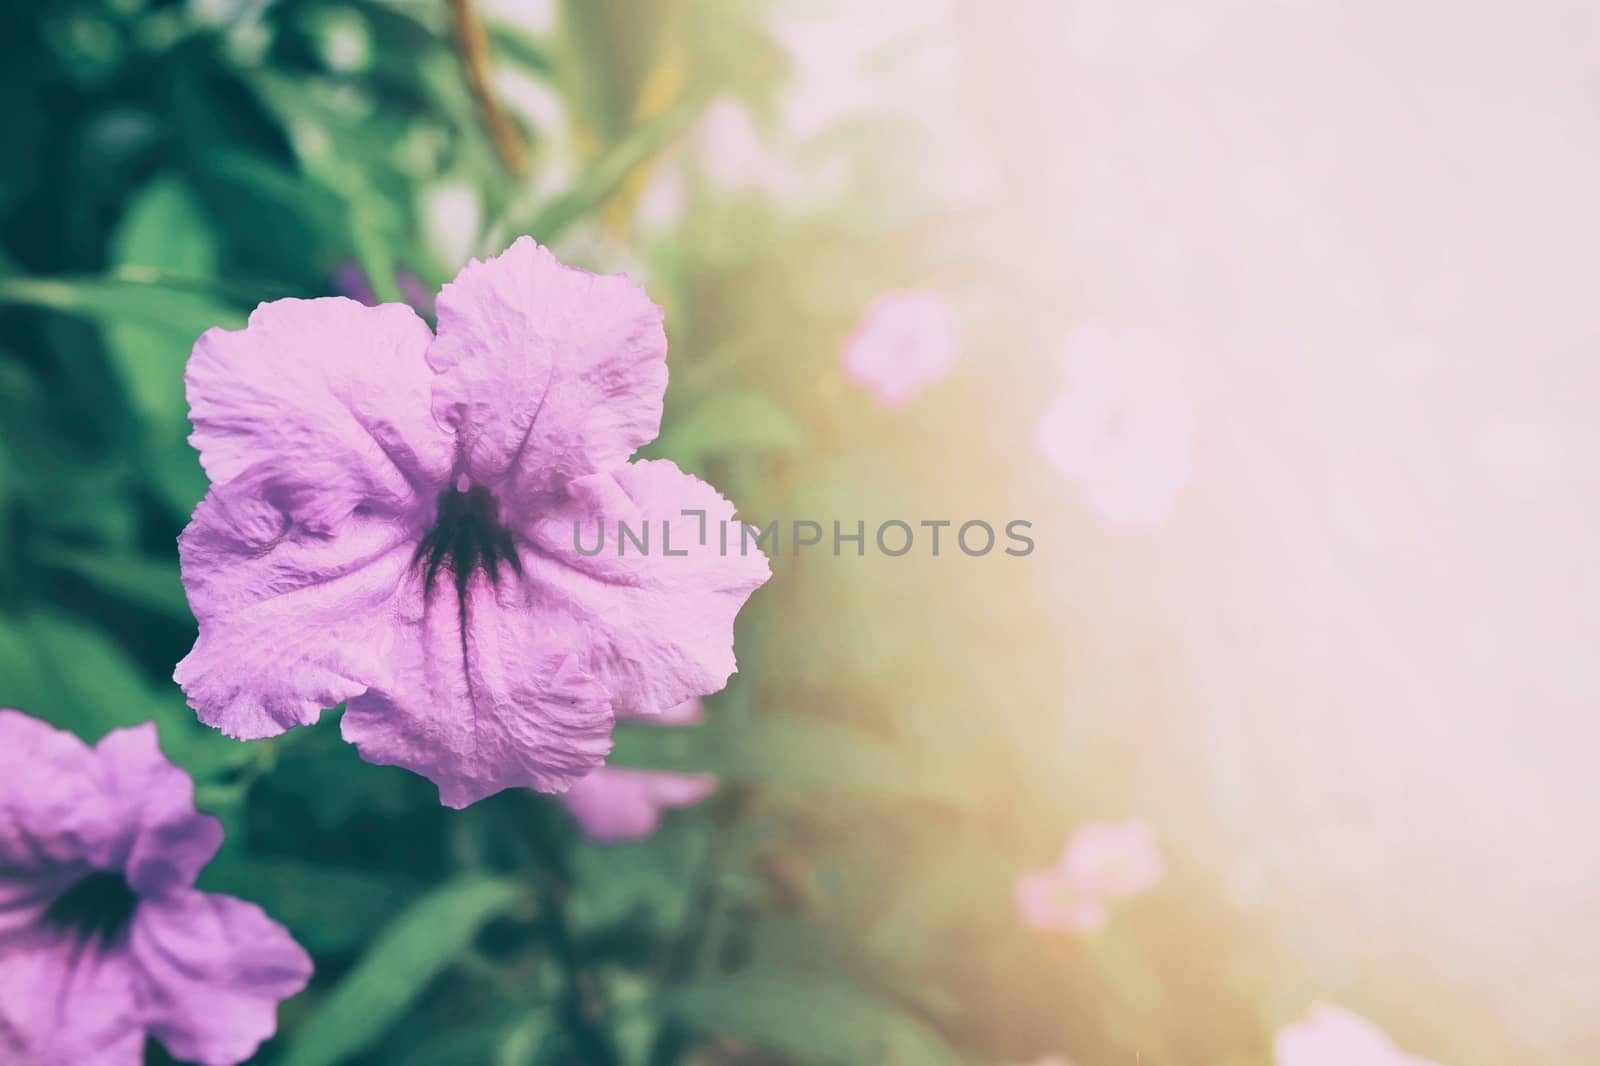 Closed-up Minnieroot or Ruellia Tuberosa Flowers in Vintage Style with Light Fare Space for Text.